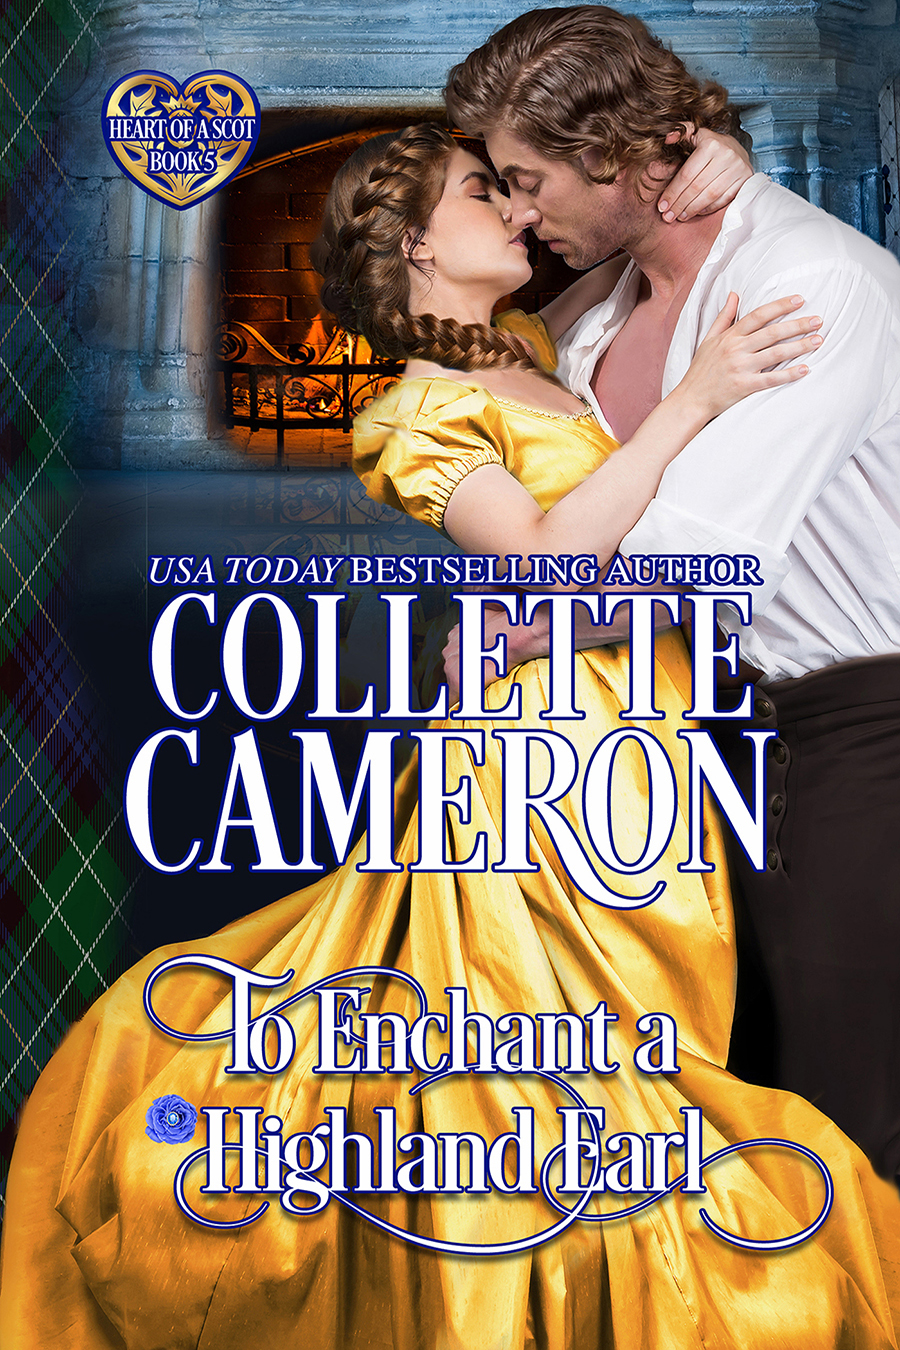 Heart of a Scot Special: a 99¢ sale and a FREE book! 2